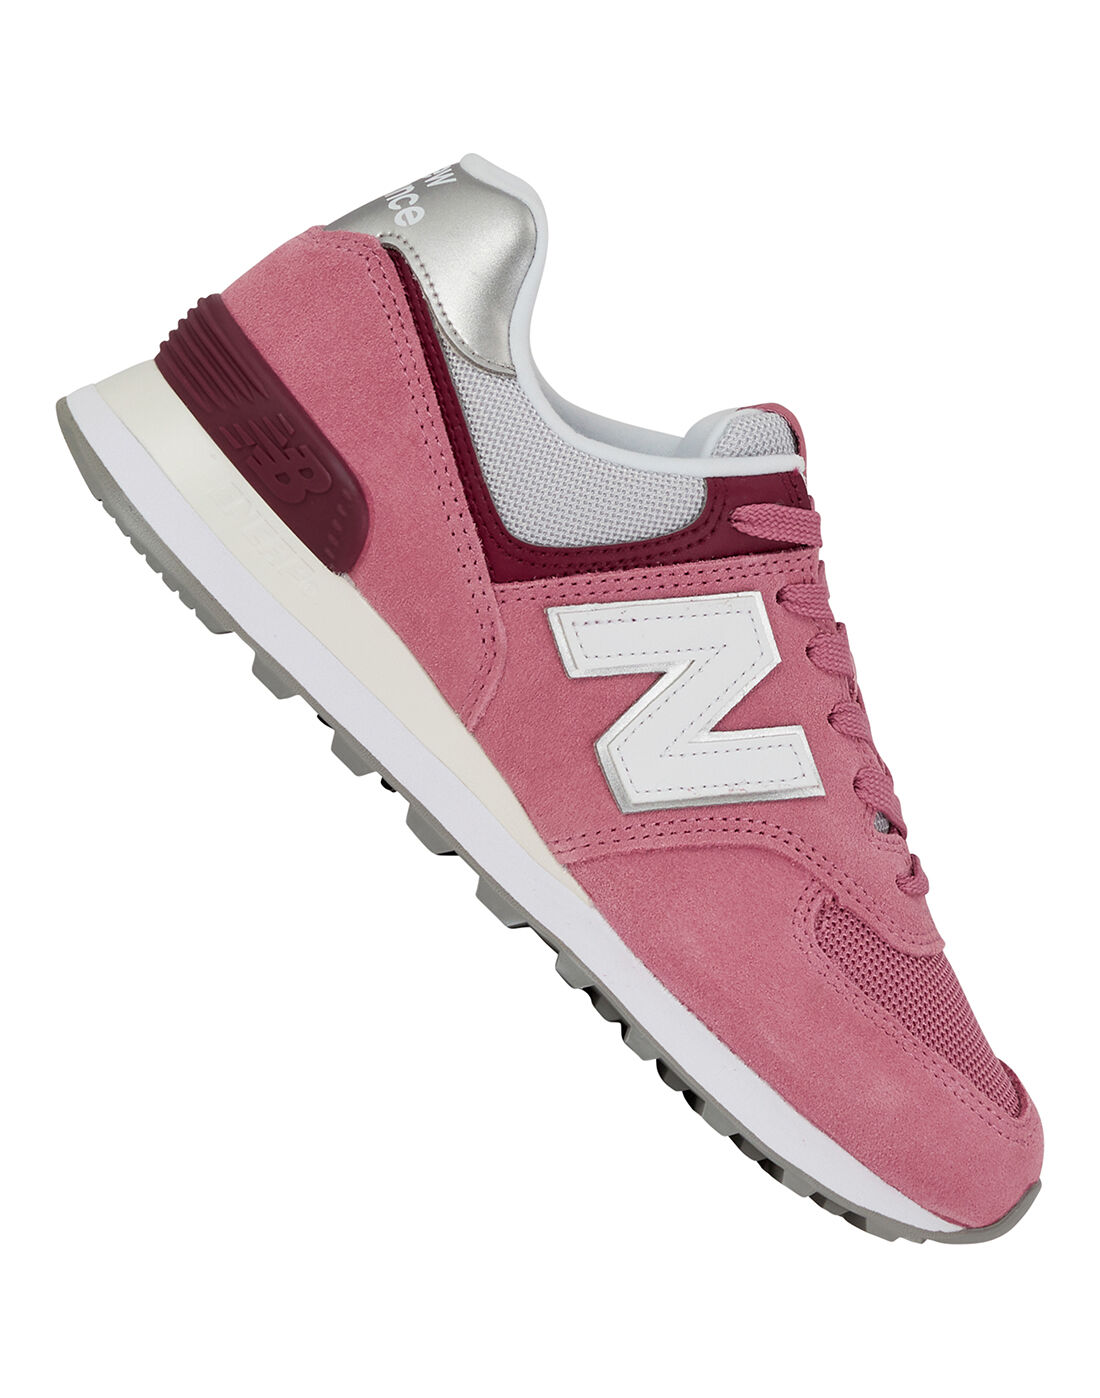 New Balance Womens 574 Trainers - Pink 